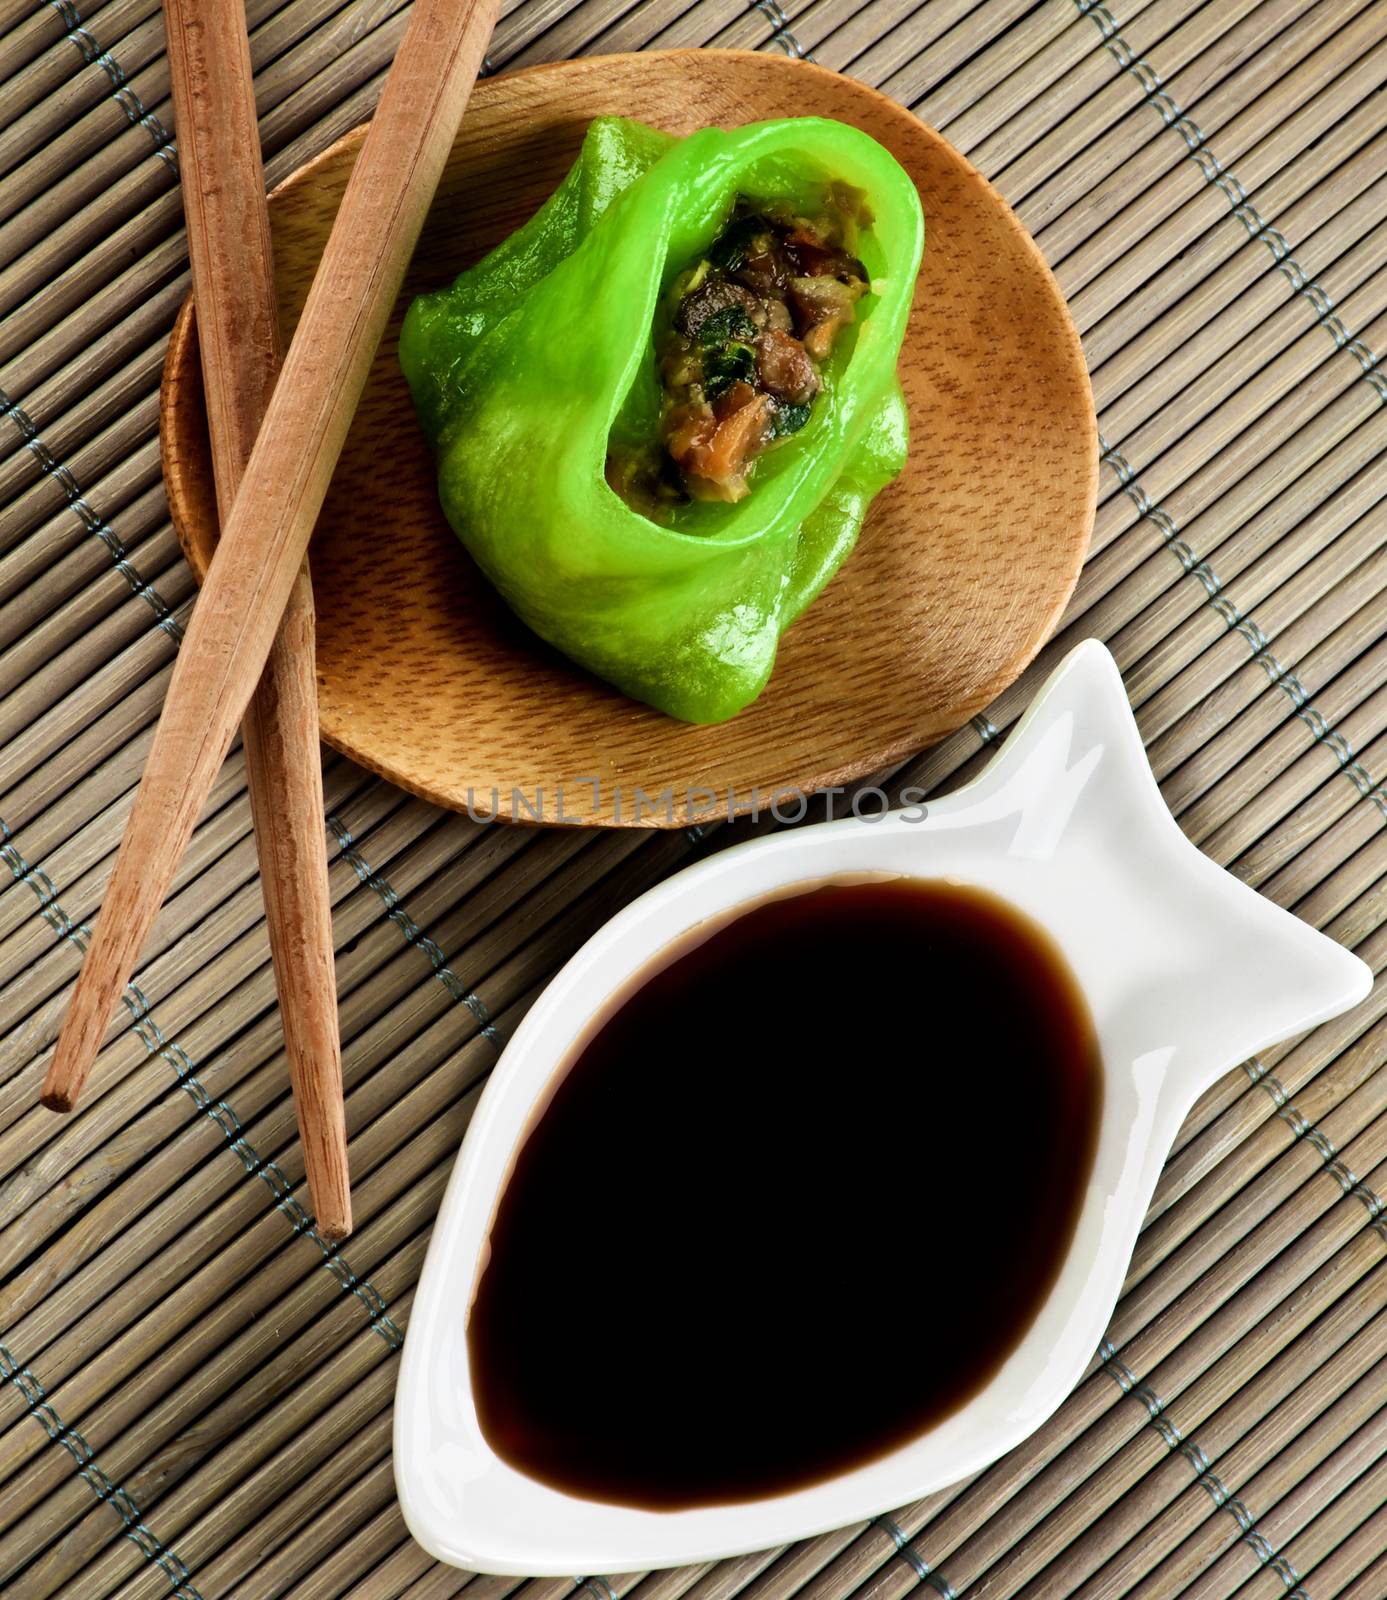 Vegetarian Yasai Dim Sum on Wooden Plate with Soy Sauce and Chopsticks closeup on Straw Mat background